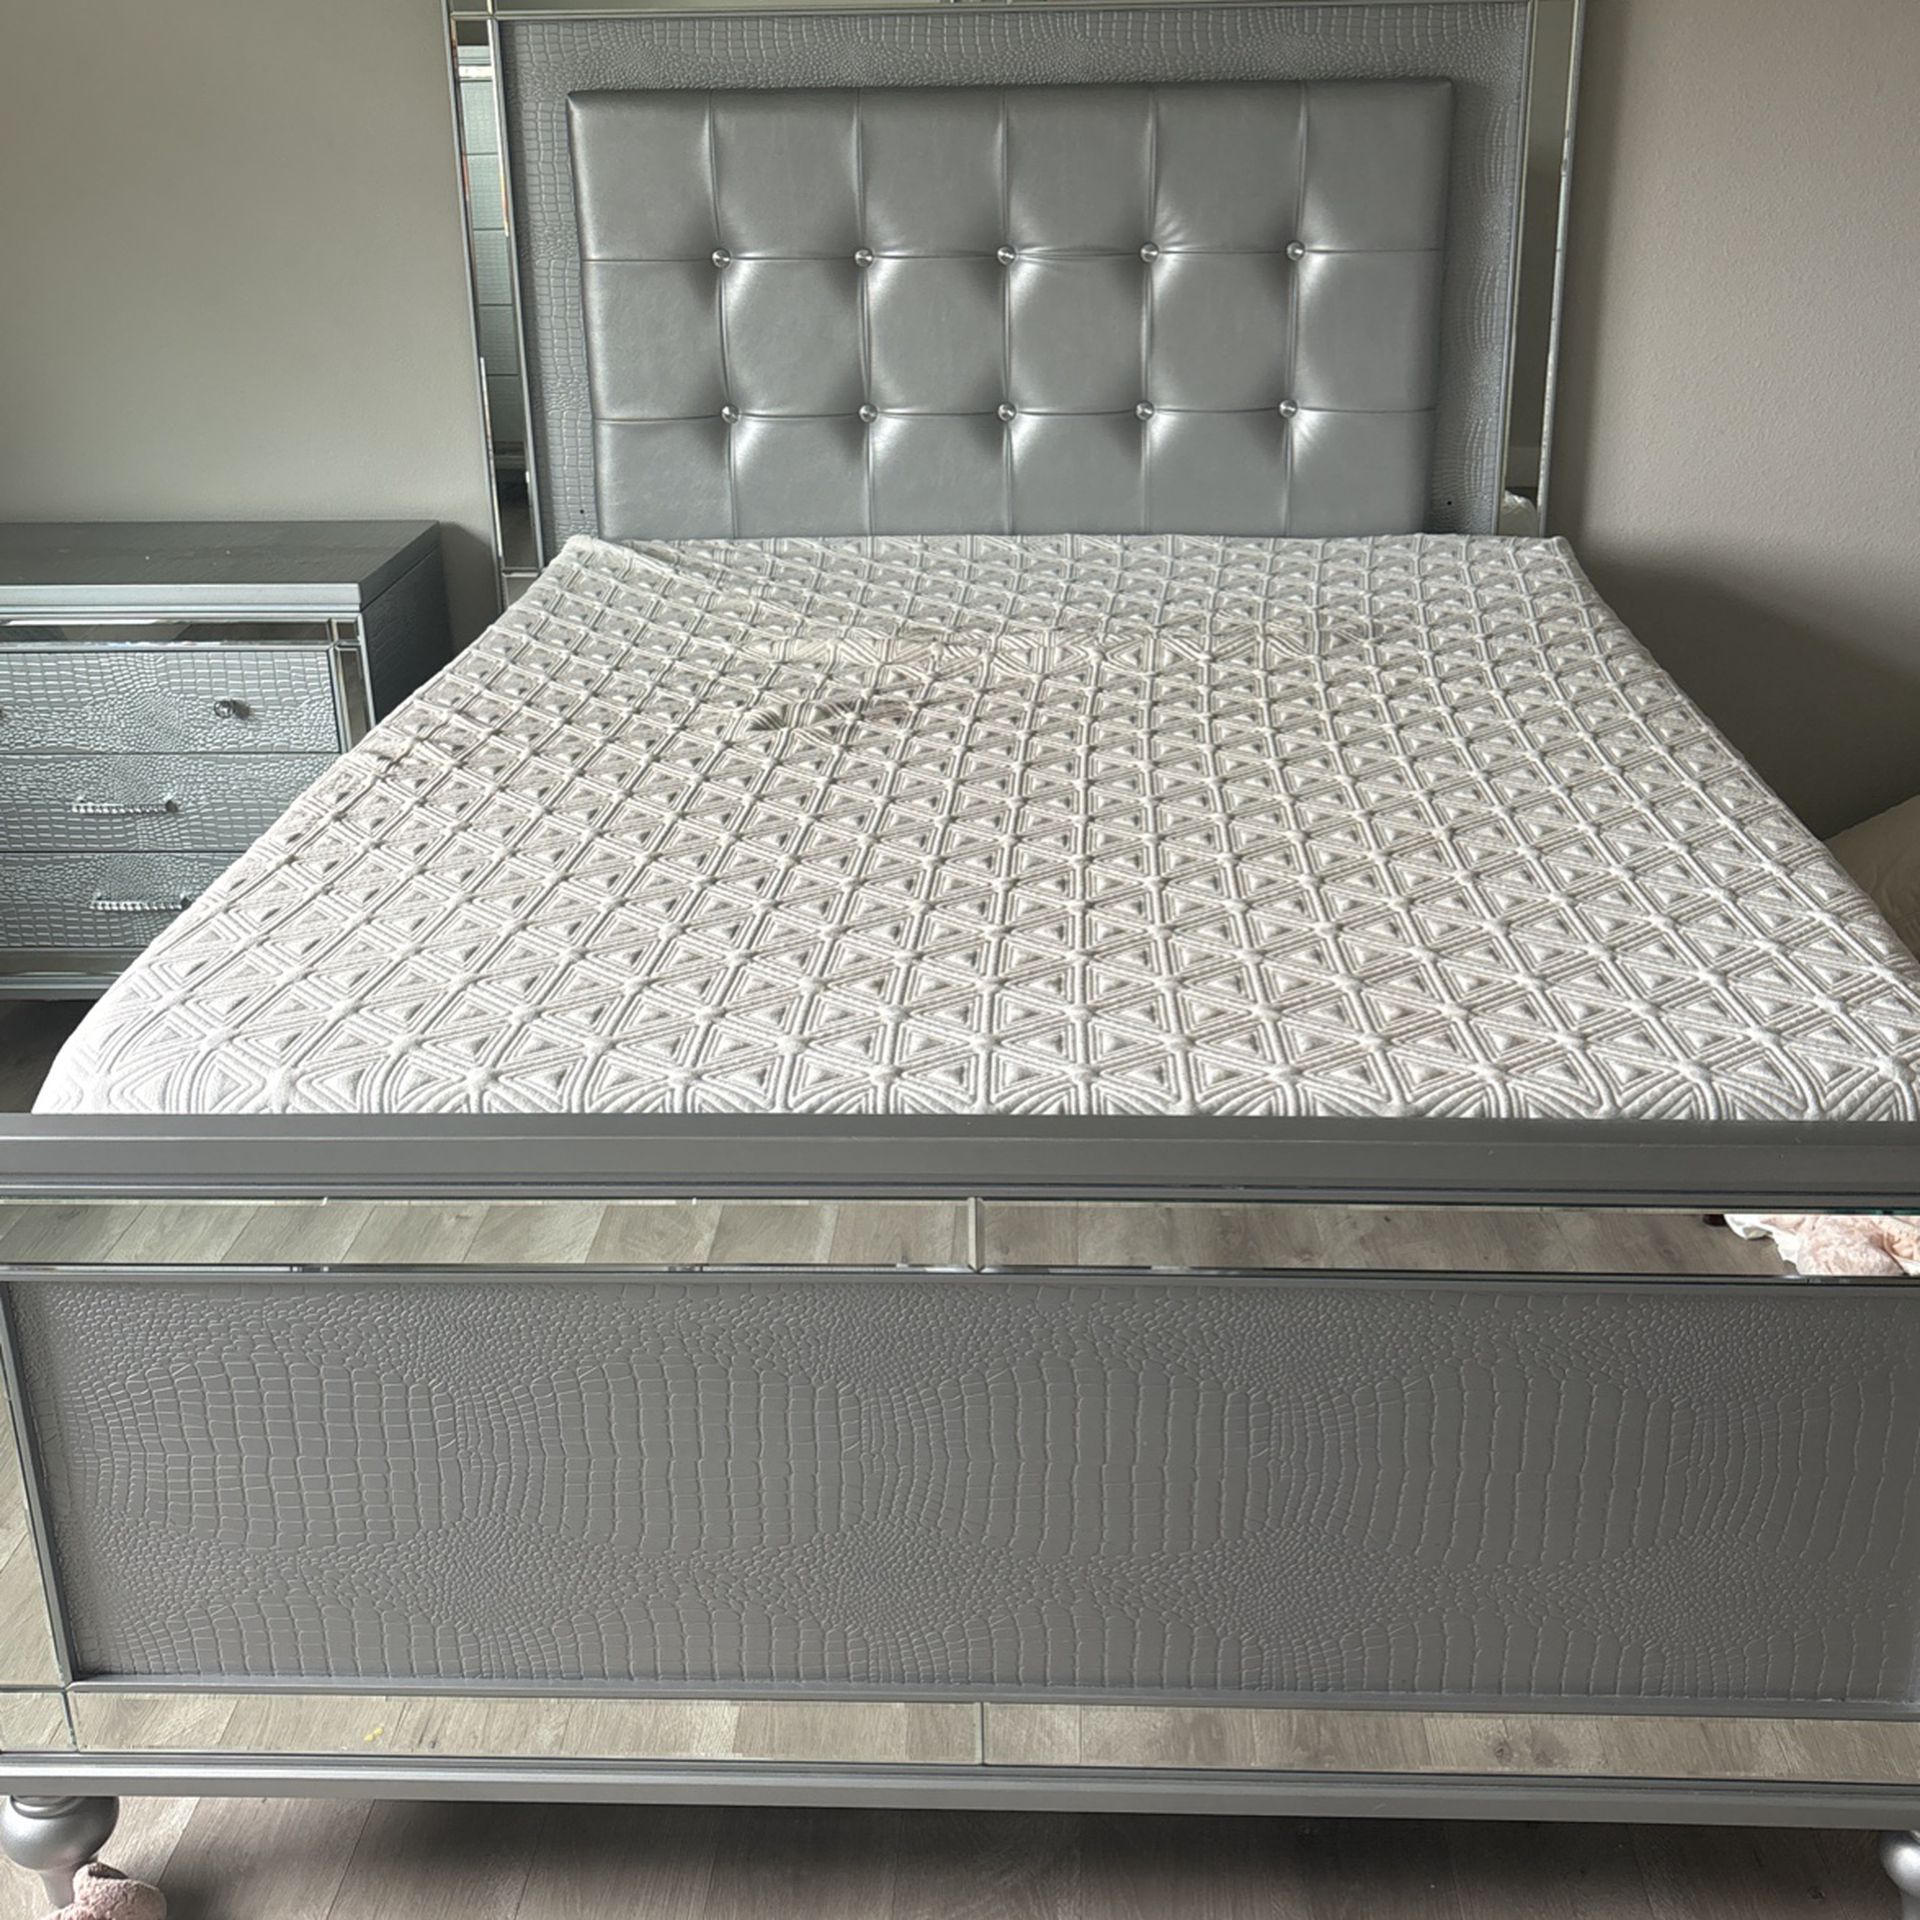 4 piece bed set Pick up by 4/24